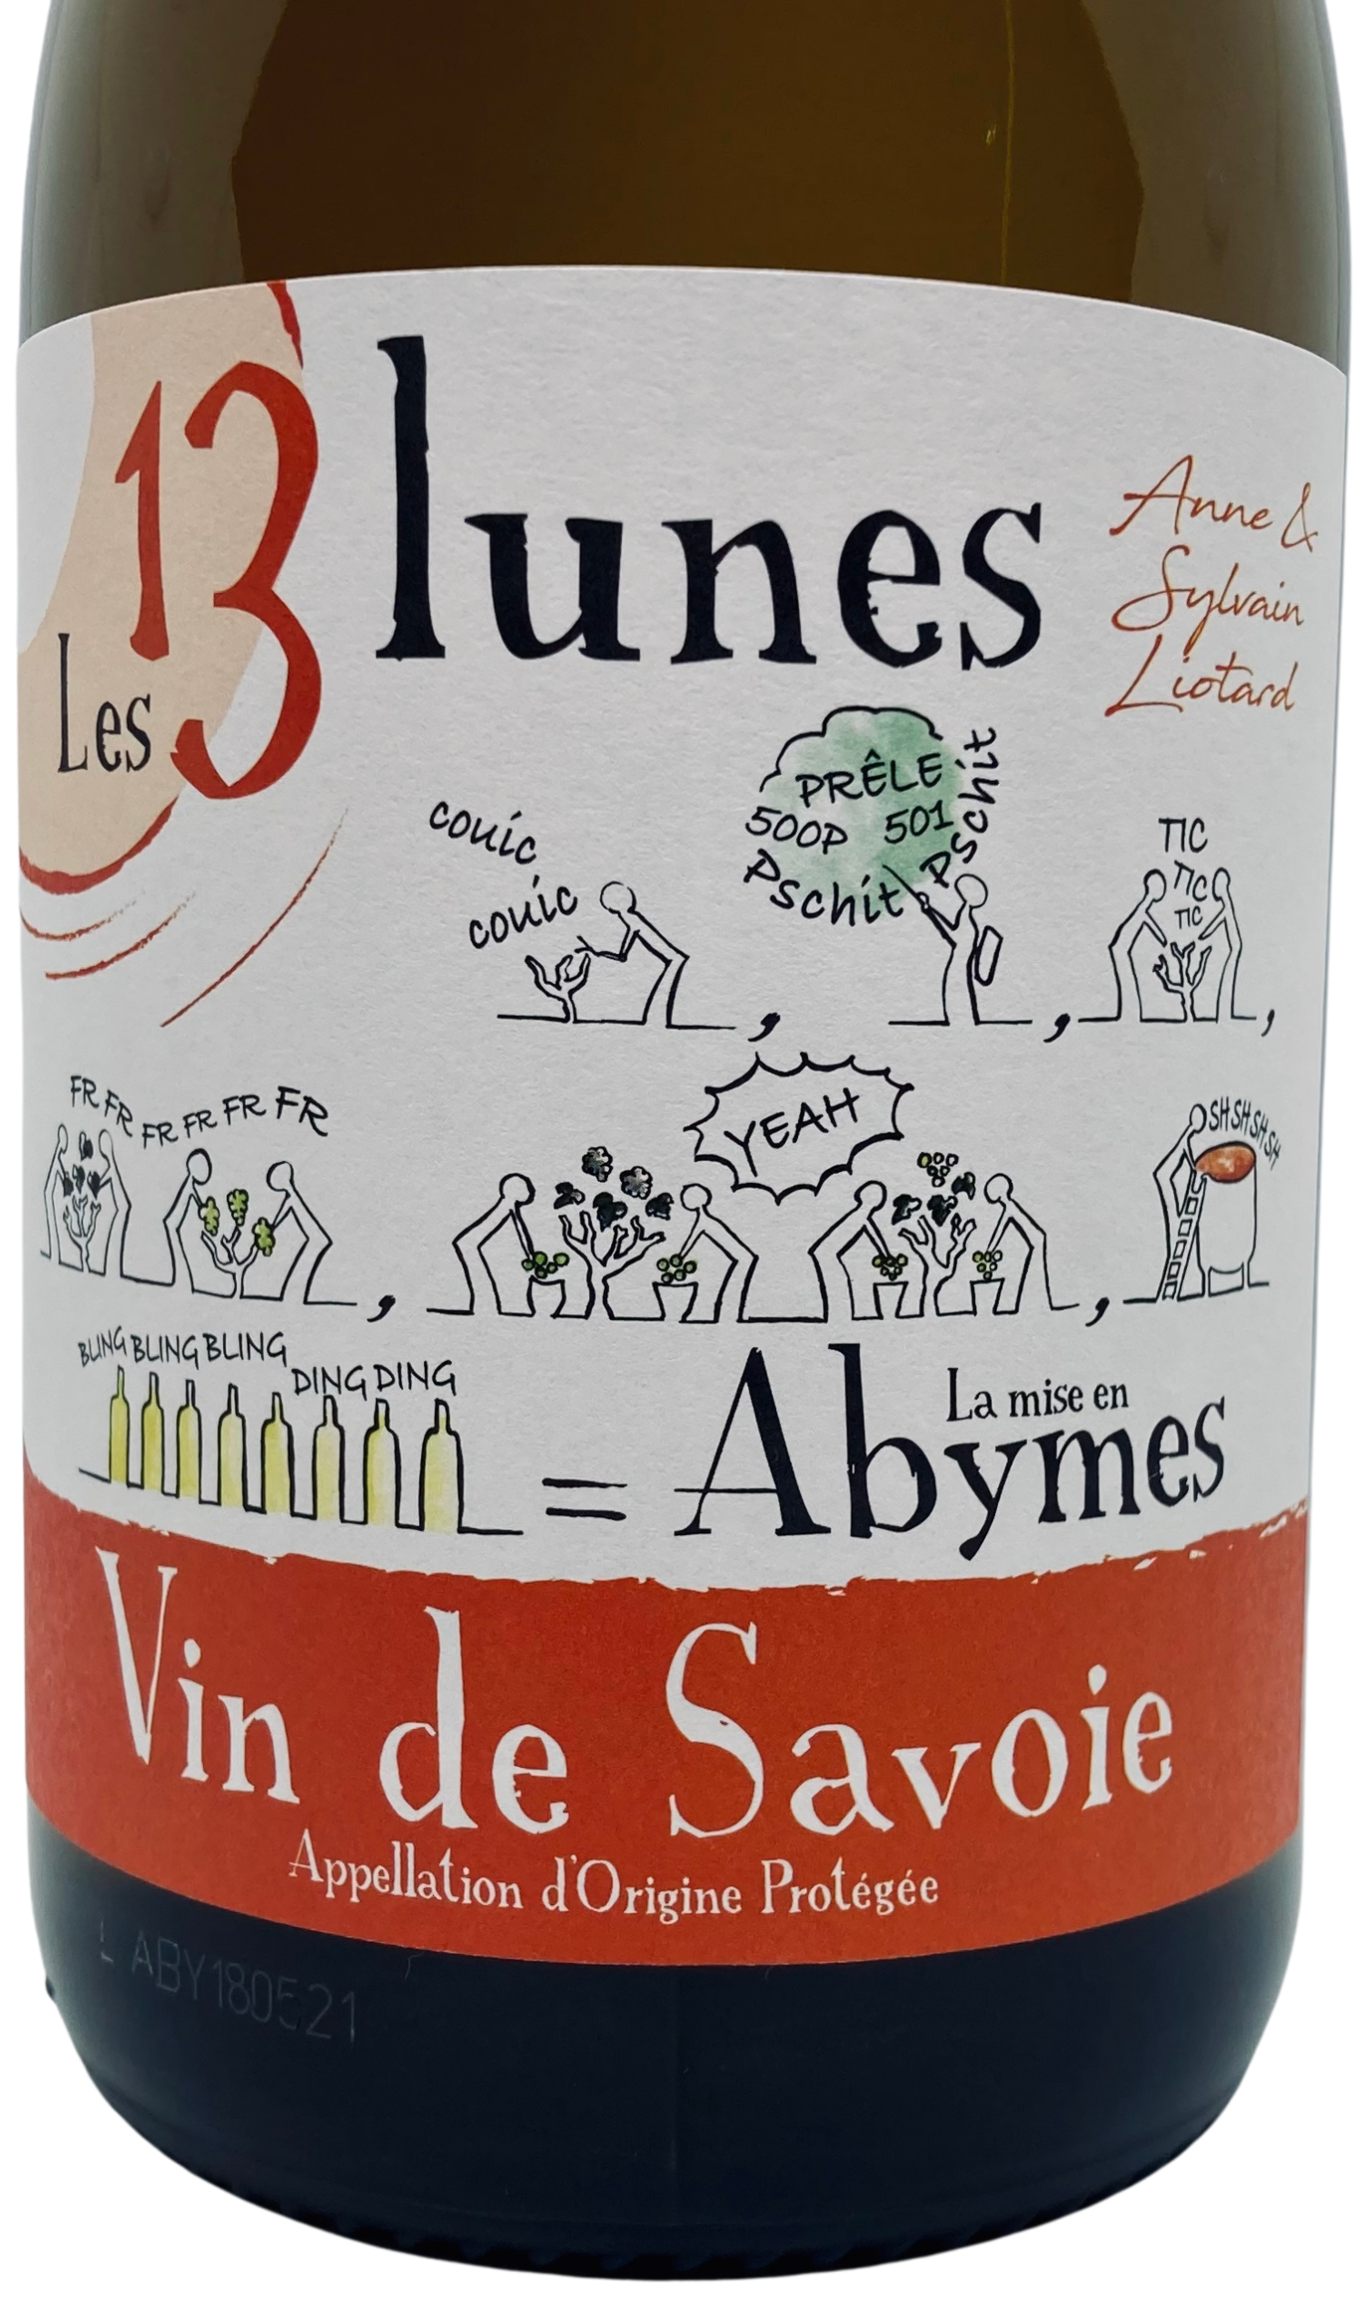 13lunes-abymes20#01